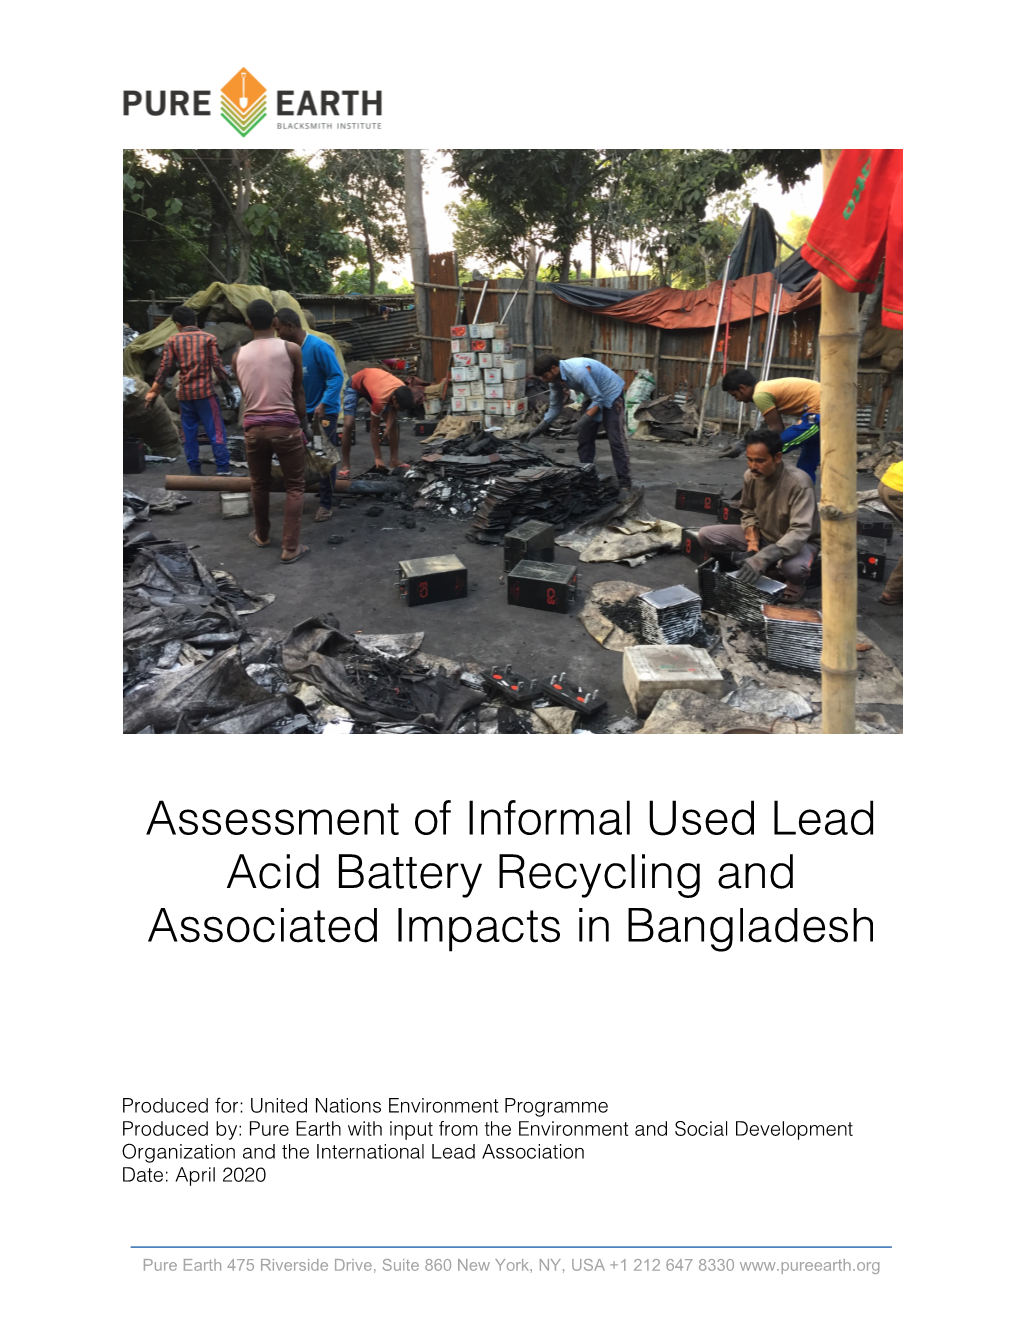 Assessment of Informal Used Lead Acid Battery Recycling and Associated Impacts in Bangladesh